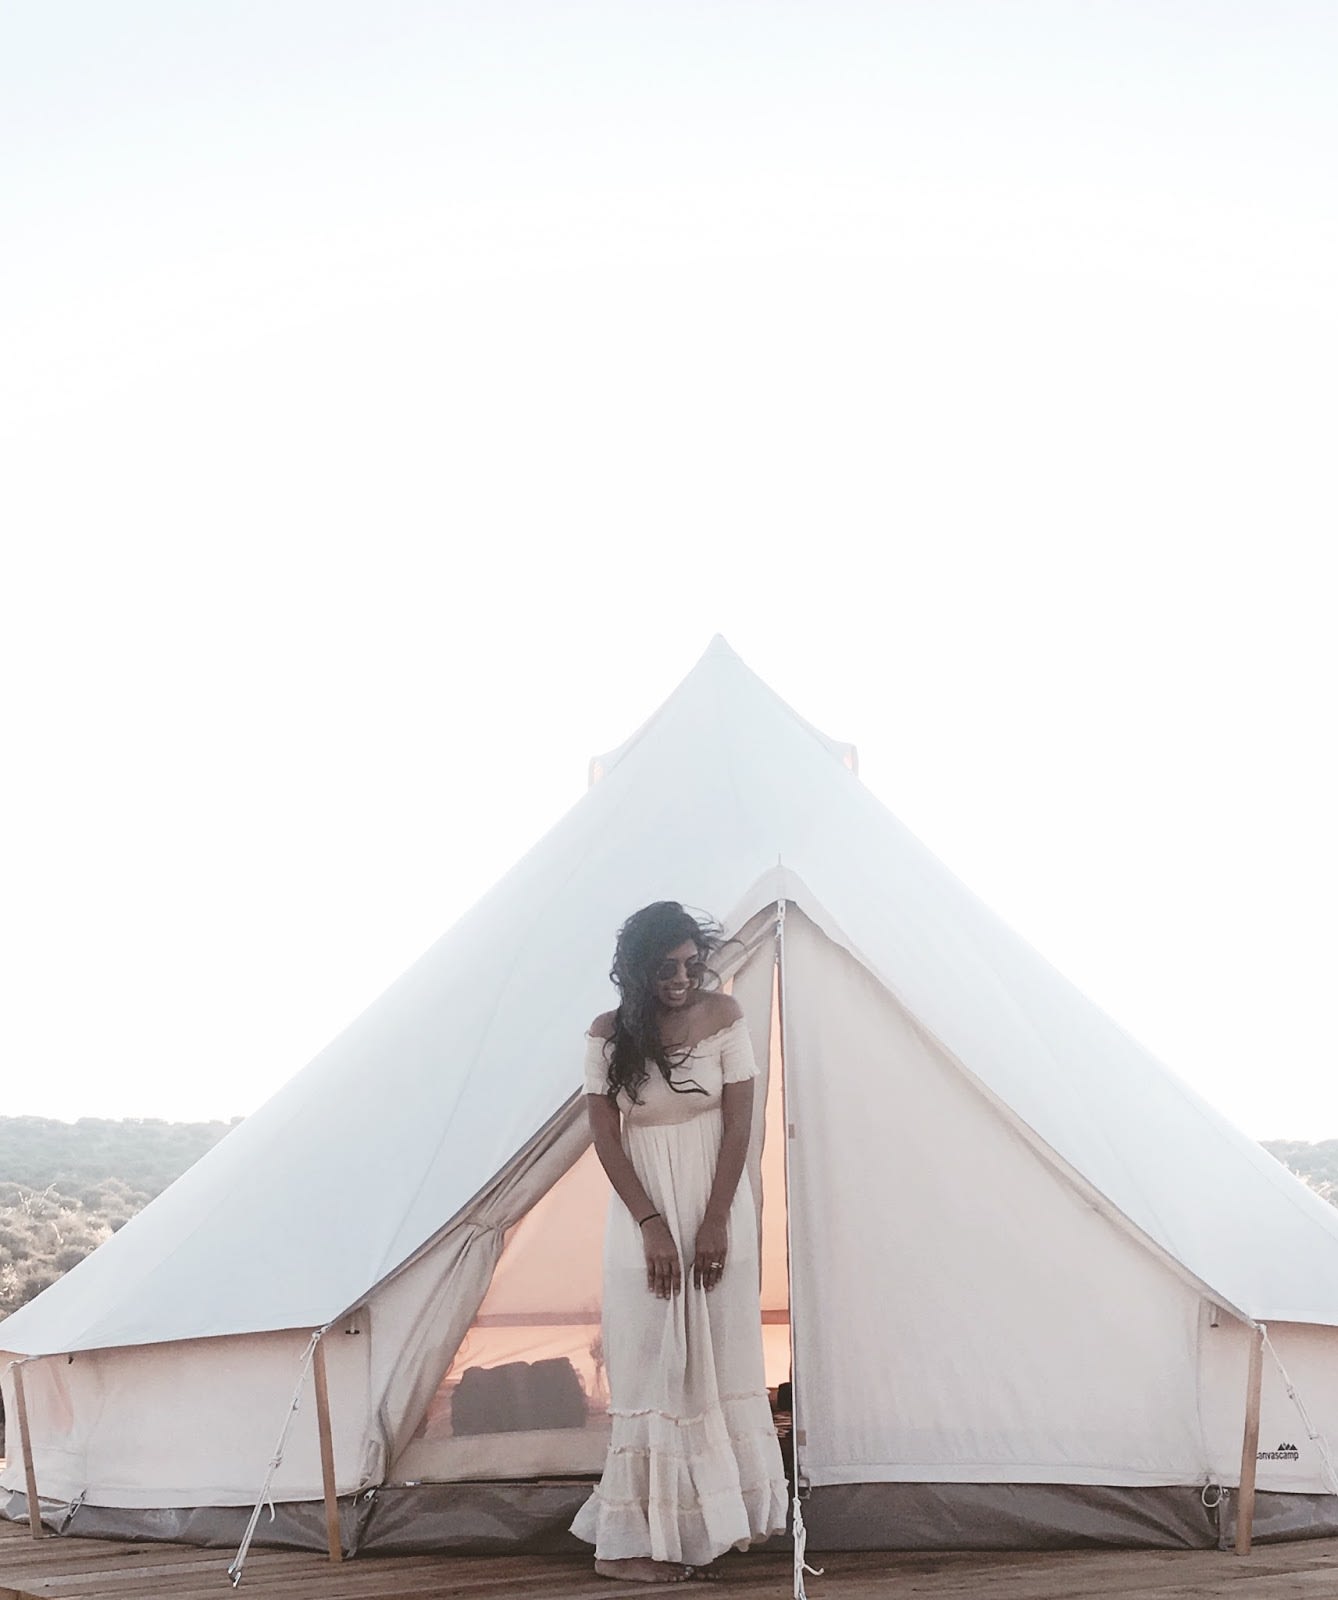 Bell Tent2 Glamping at Shash Dine'